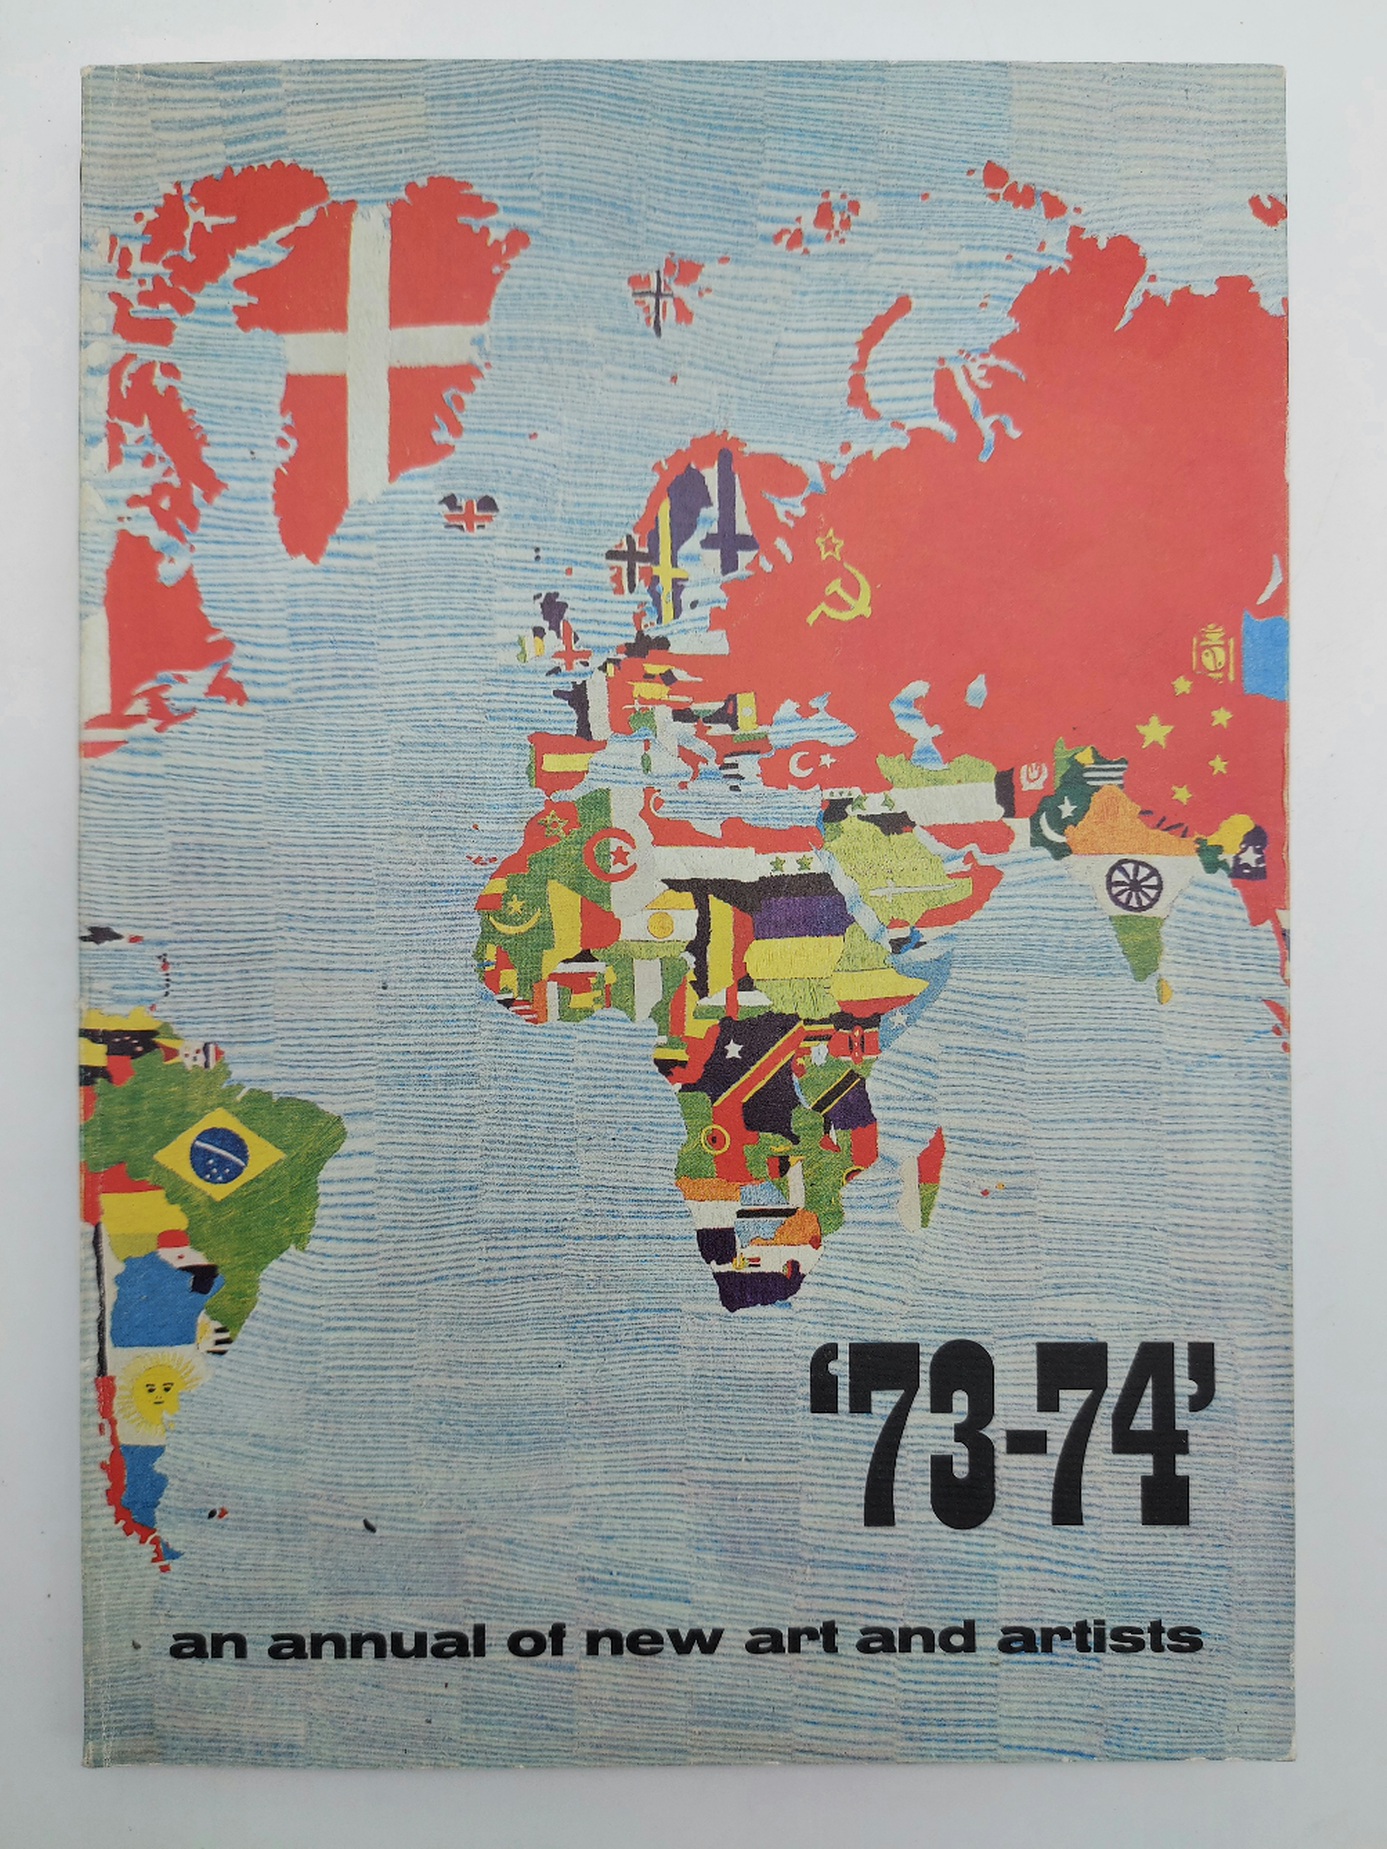 '73-'74. An Annual of New Art and Artists